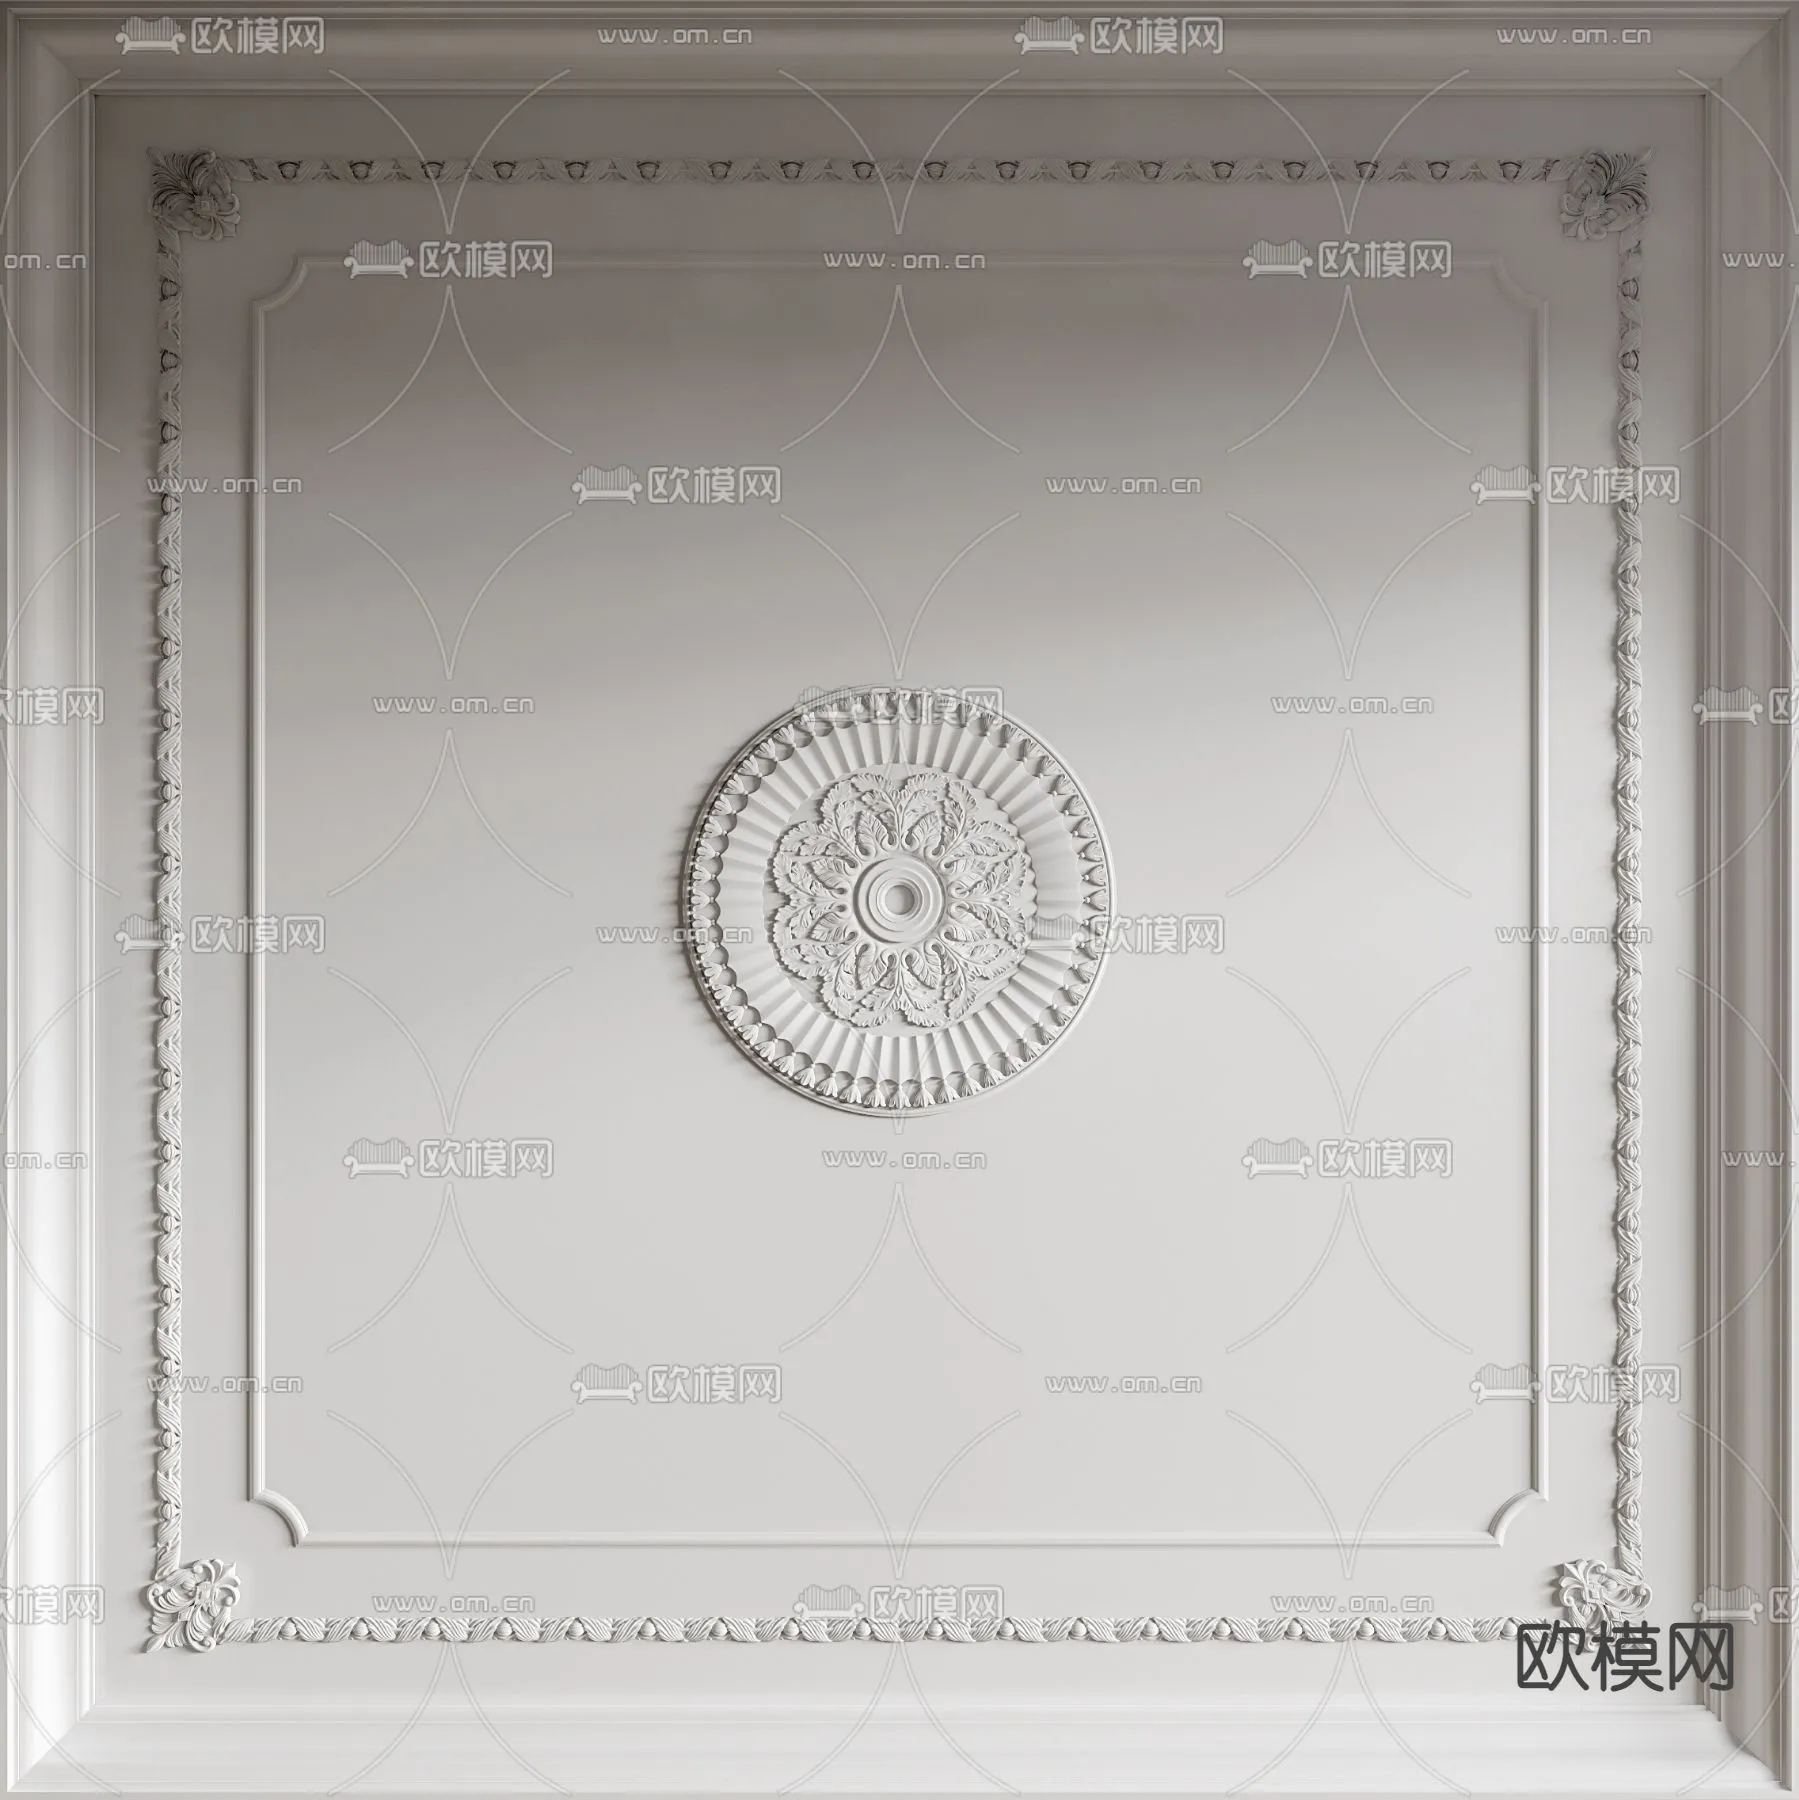 3DS MAX – DETAIL – CEILING – VRAY / CORONA – 3D MODEL – 3185